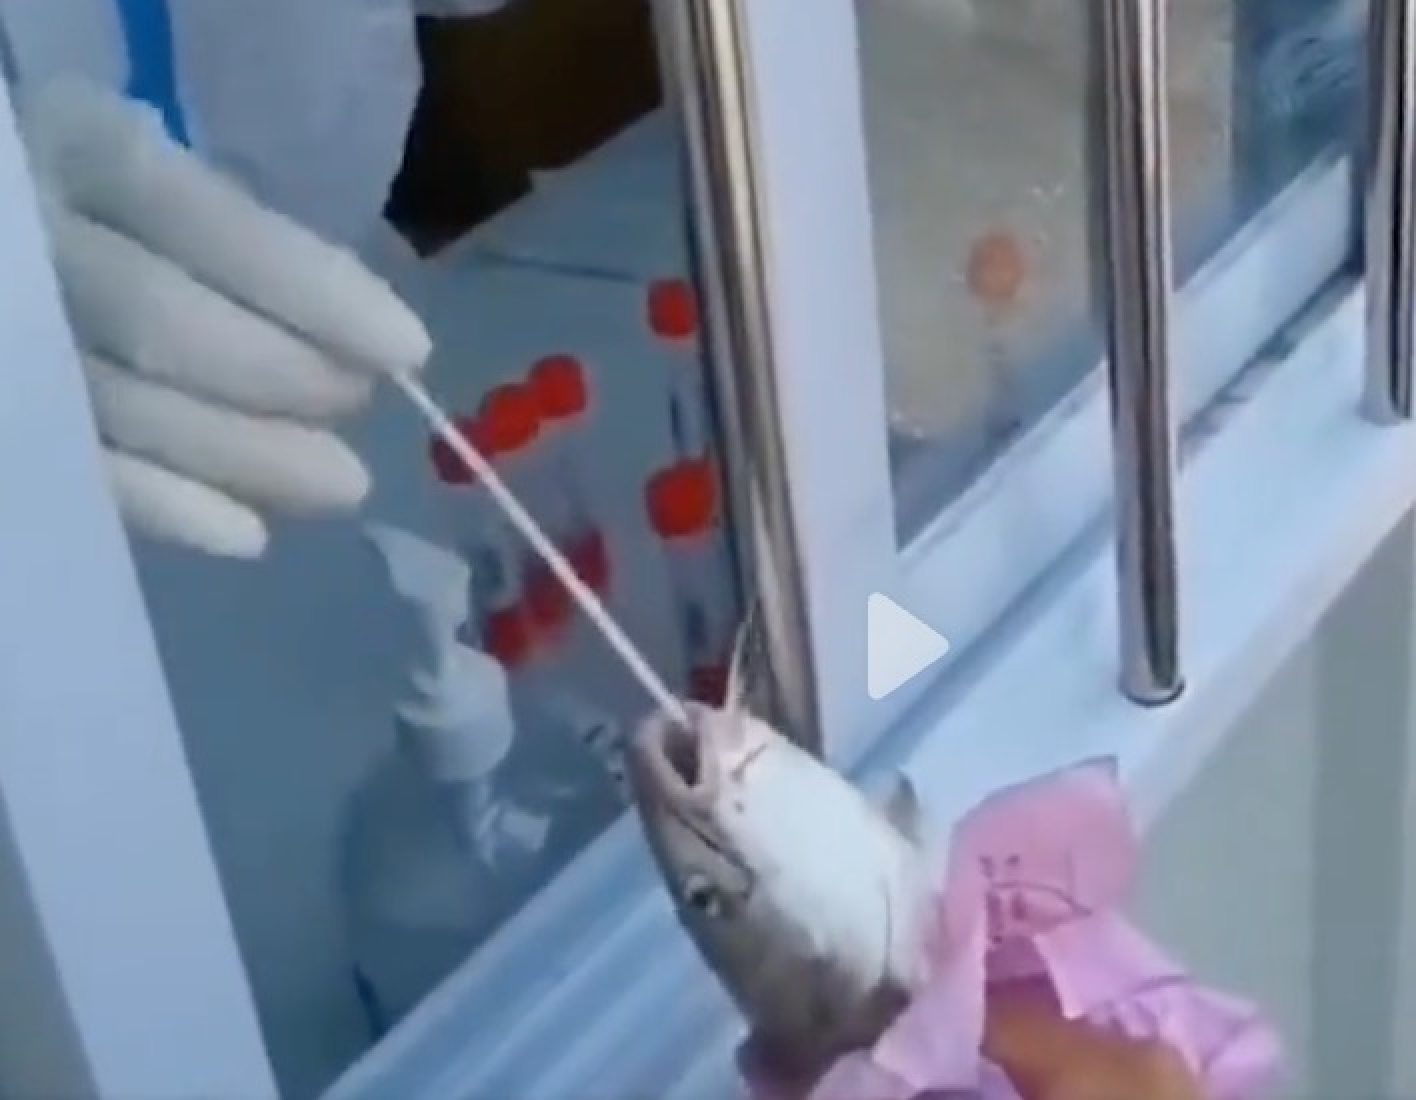 A video circulating online shows workers in white hazmat suits inserting a cotton bud into the mouth of a fish, and rubbing buds along the bodies of crabs and shrimps. Photo: Toutiao